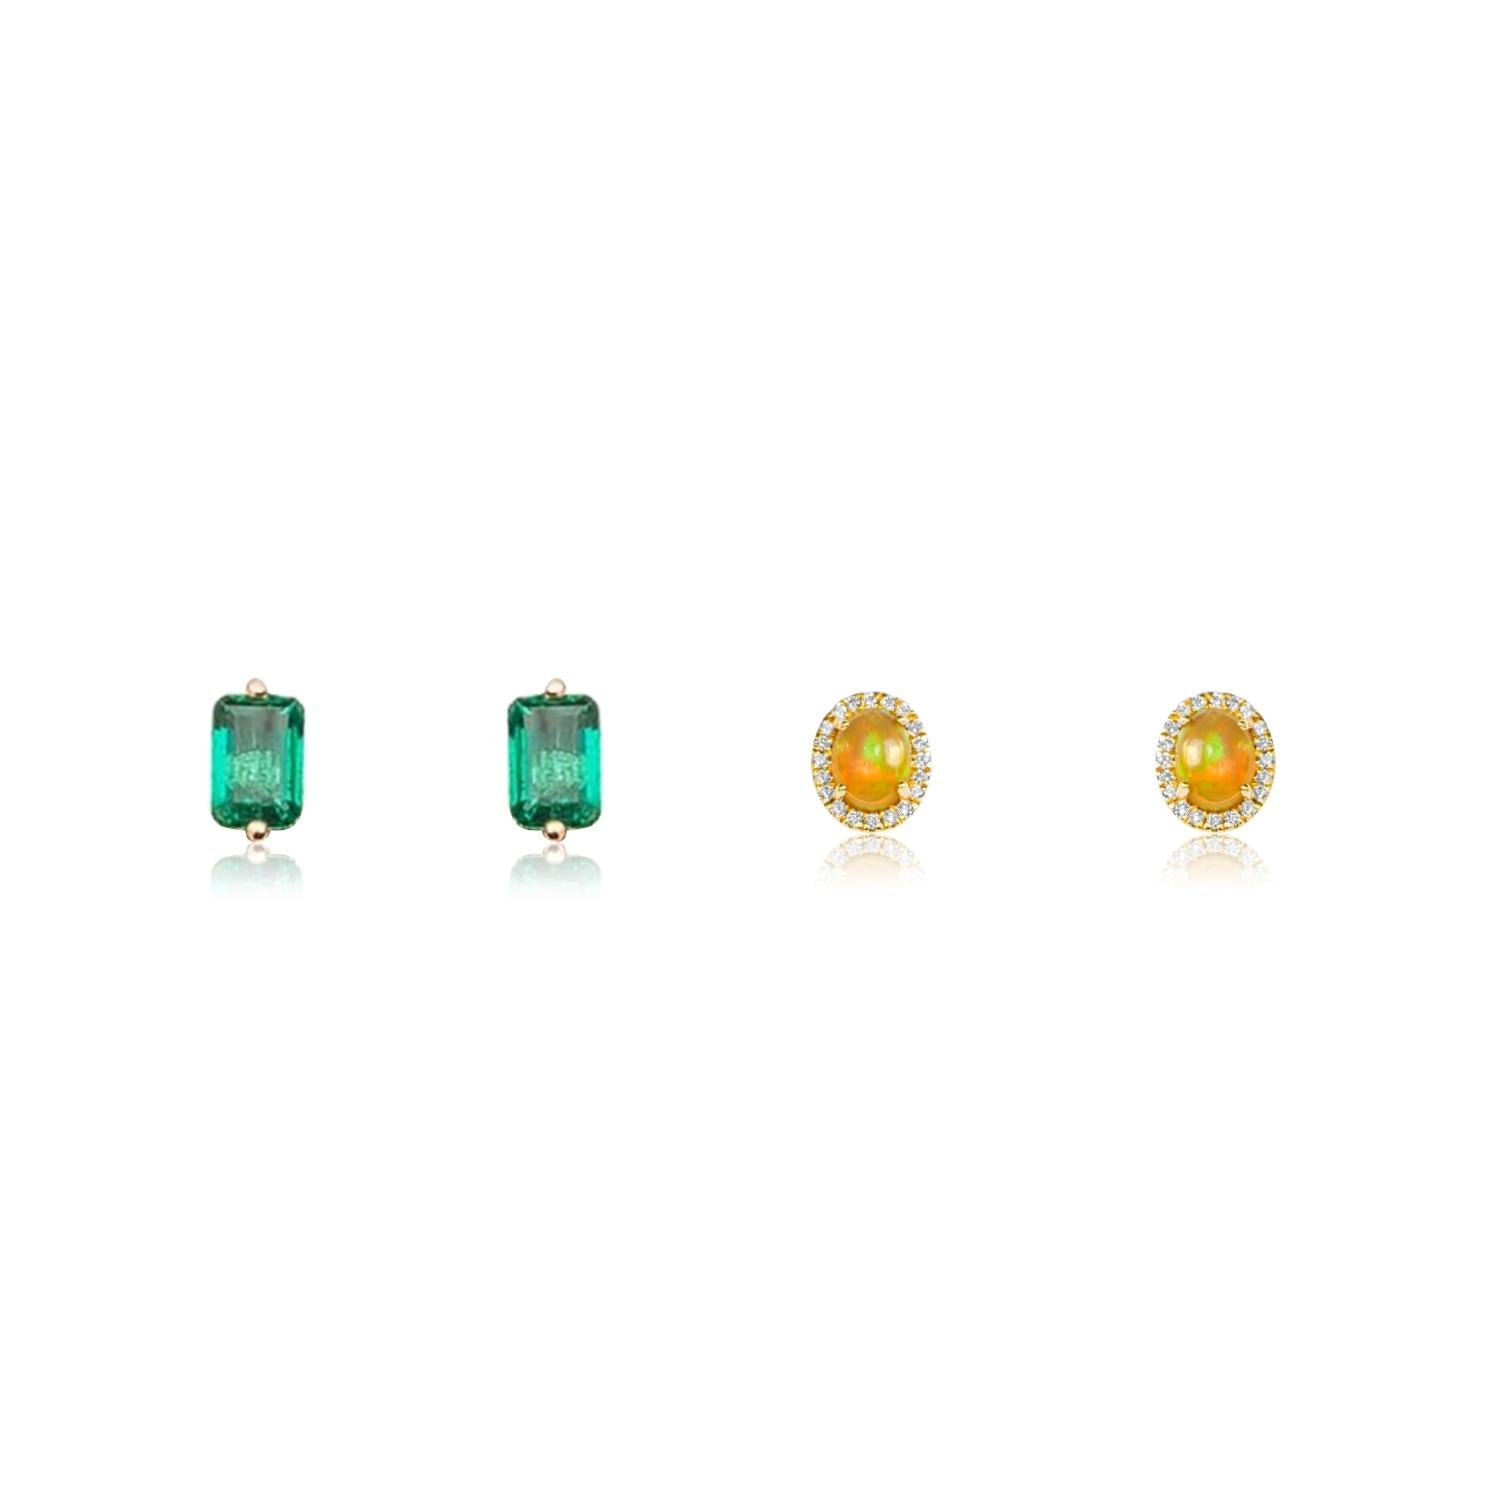 Rinoor Fine Jewelry's iconic Opal and Diamond Stud Earrings stand as a testament to the brand's unwavering commitment to elegance, craftsmanship, and timeless beauty. These exquisite earrings are a harmonious blend of nature's finest gemstones and